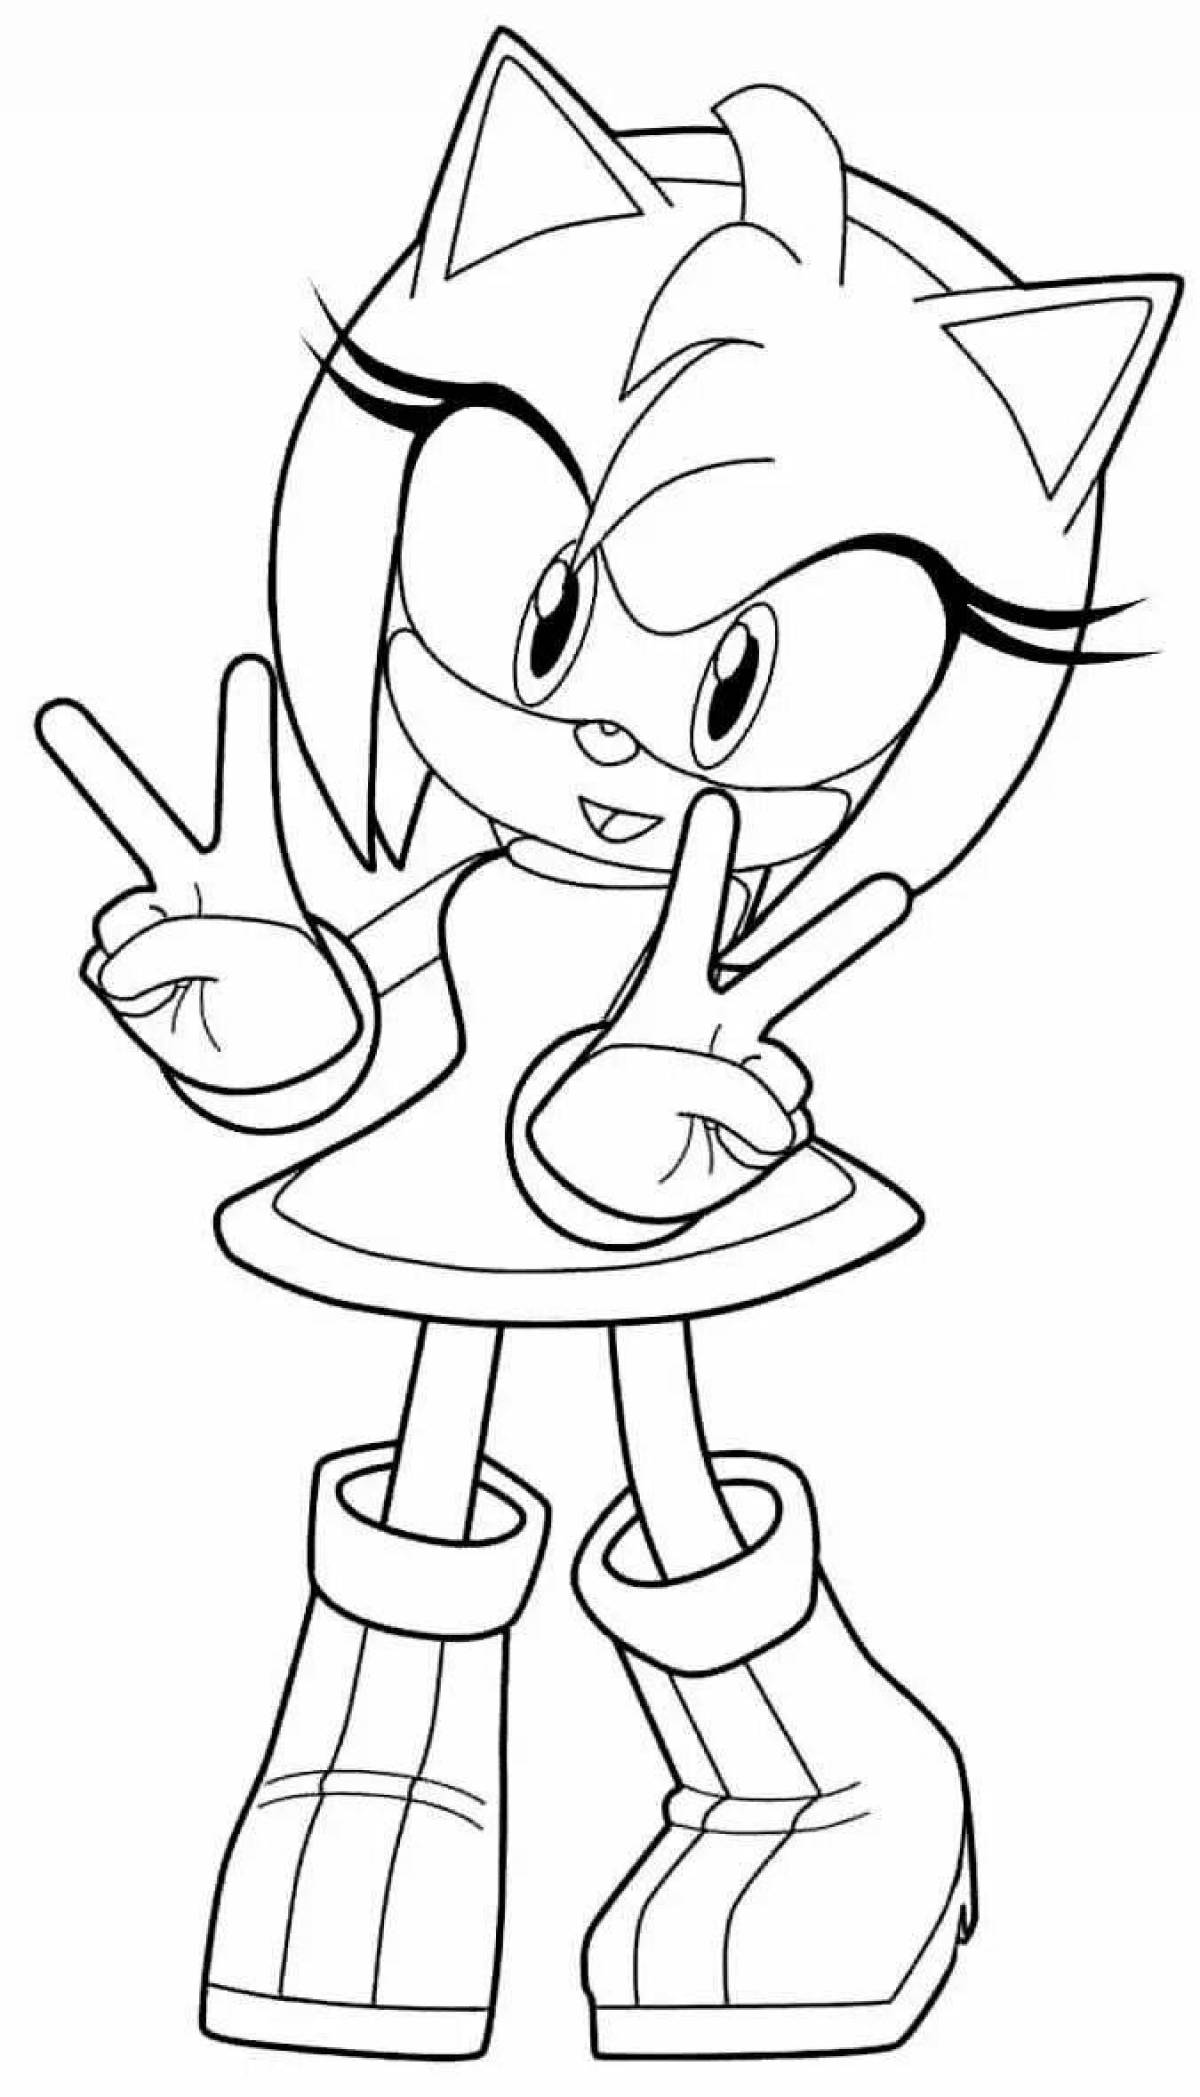 Sonic girl funny coloring book